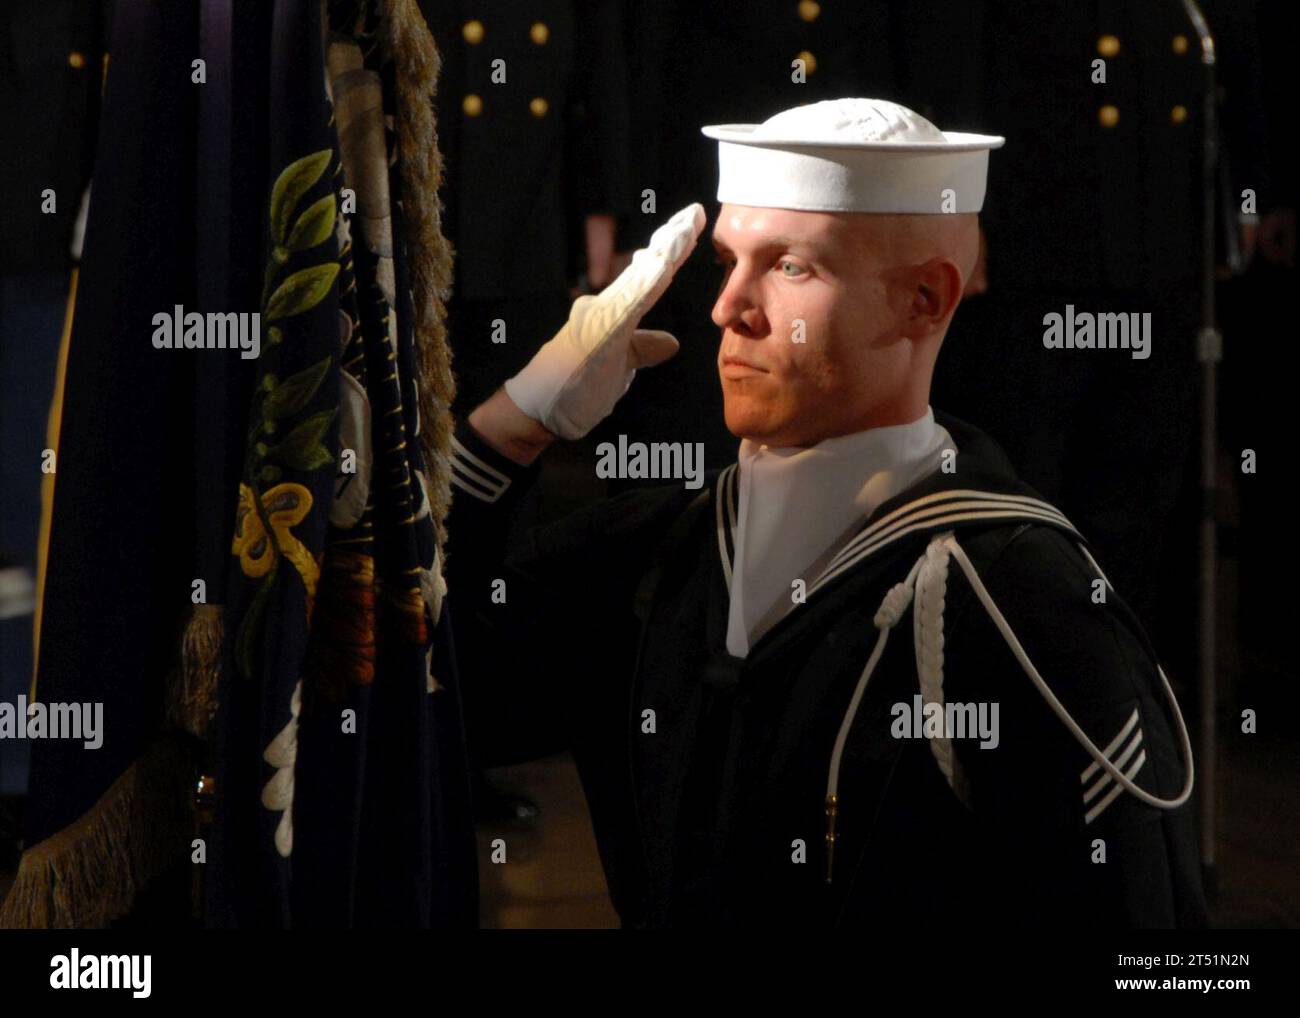 0612300773H-019  Washington, D.C. (Dec. 30, 2006) - A member of the Joint Services Honor Guard salutes during the funeral for former President Gerald R. Ford. The 38th president, who served from 1974 to 1977, died at his California home December 26th at age 93. Ford's remains are in Washington, D.C., for a state funeral in the Capitol Rotunda and a funeral service at the Washington National Cathedral. A private interment service is scheduled for Jan. 3, 2007, at the Gerald R. Ford Presidential Museum in Grand Rapids, Mich. U.S. Navy Stock Photo